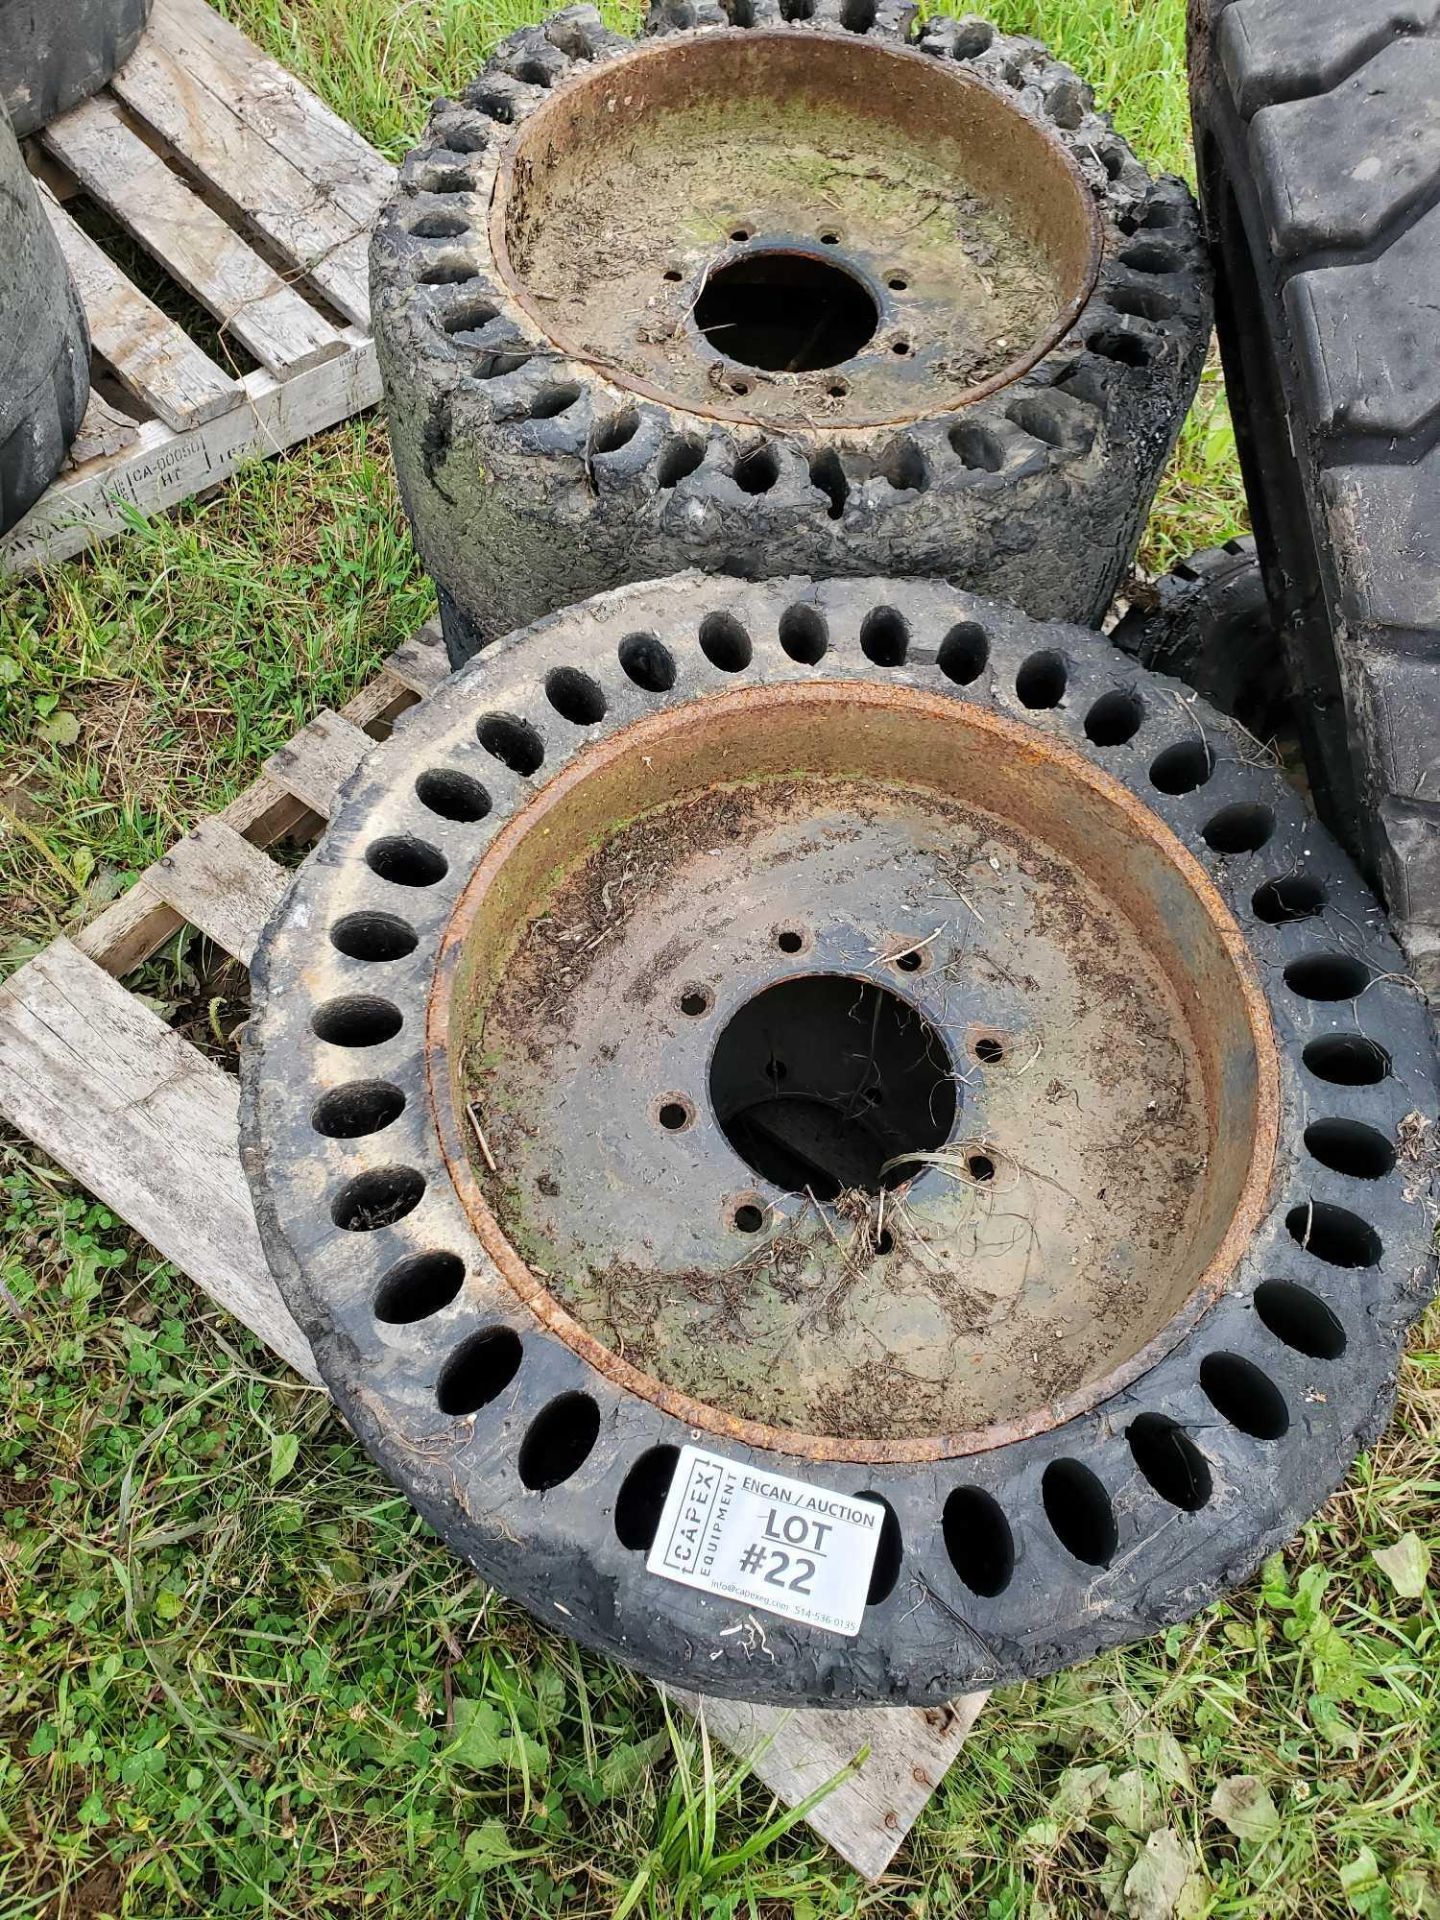 skid steer tires / roues de mini chargeuse